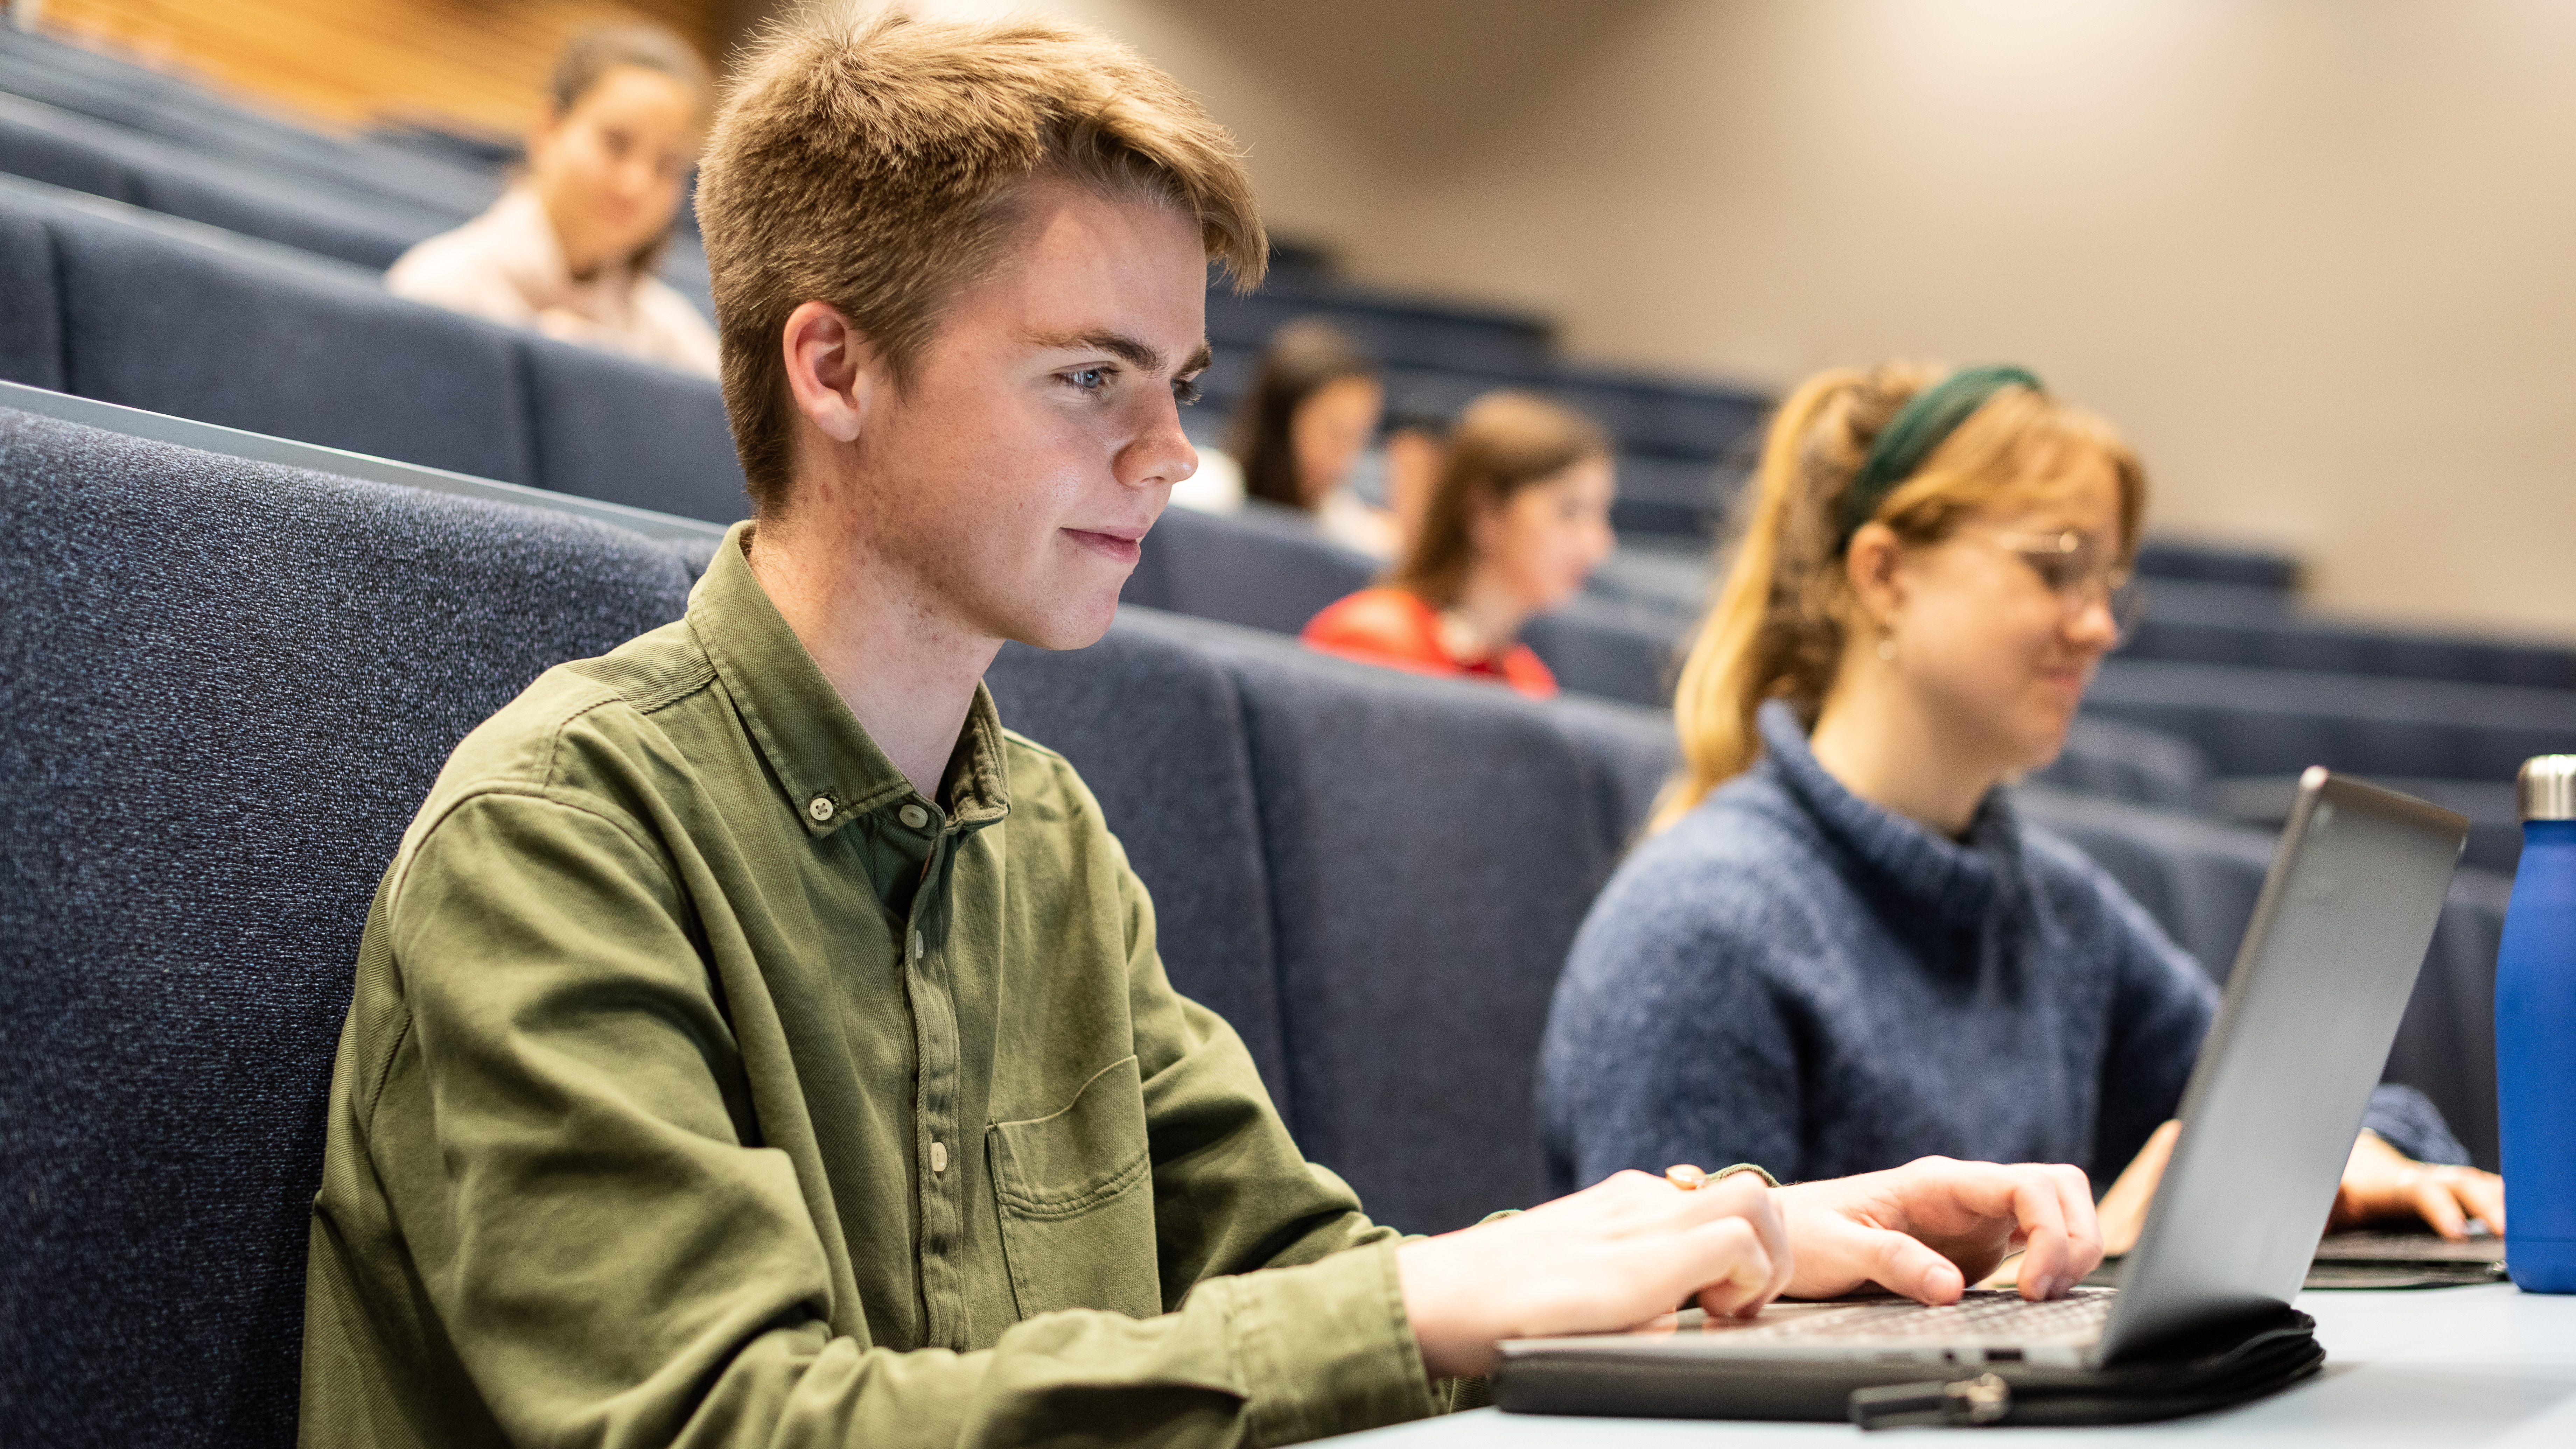 A young man using a laptop computer in a lecture hall at university.